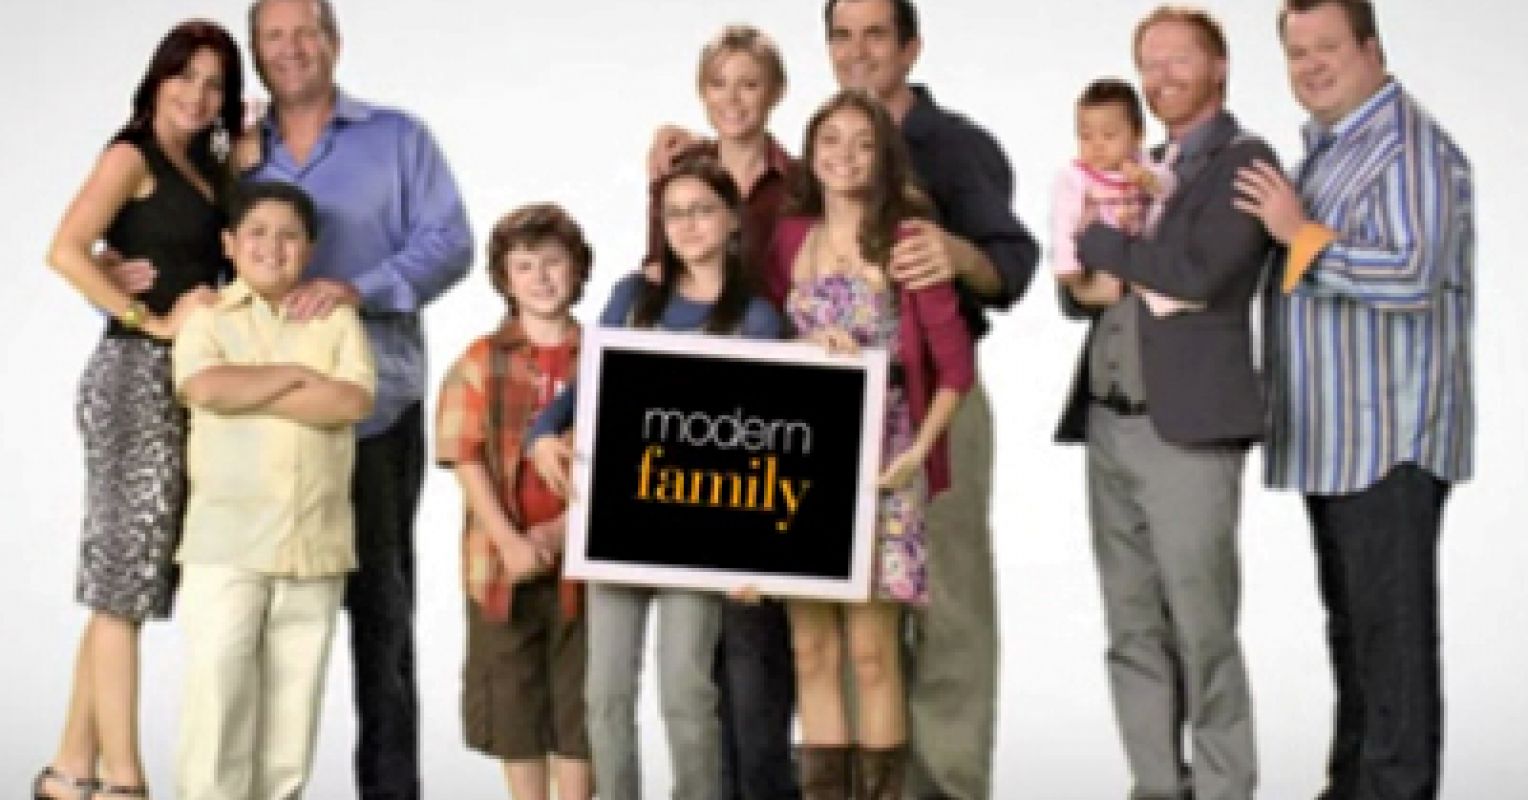 presentation about modern family